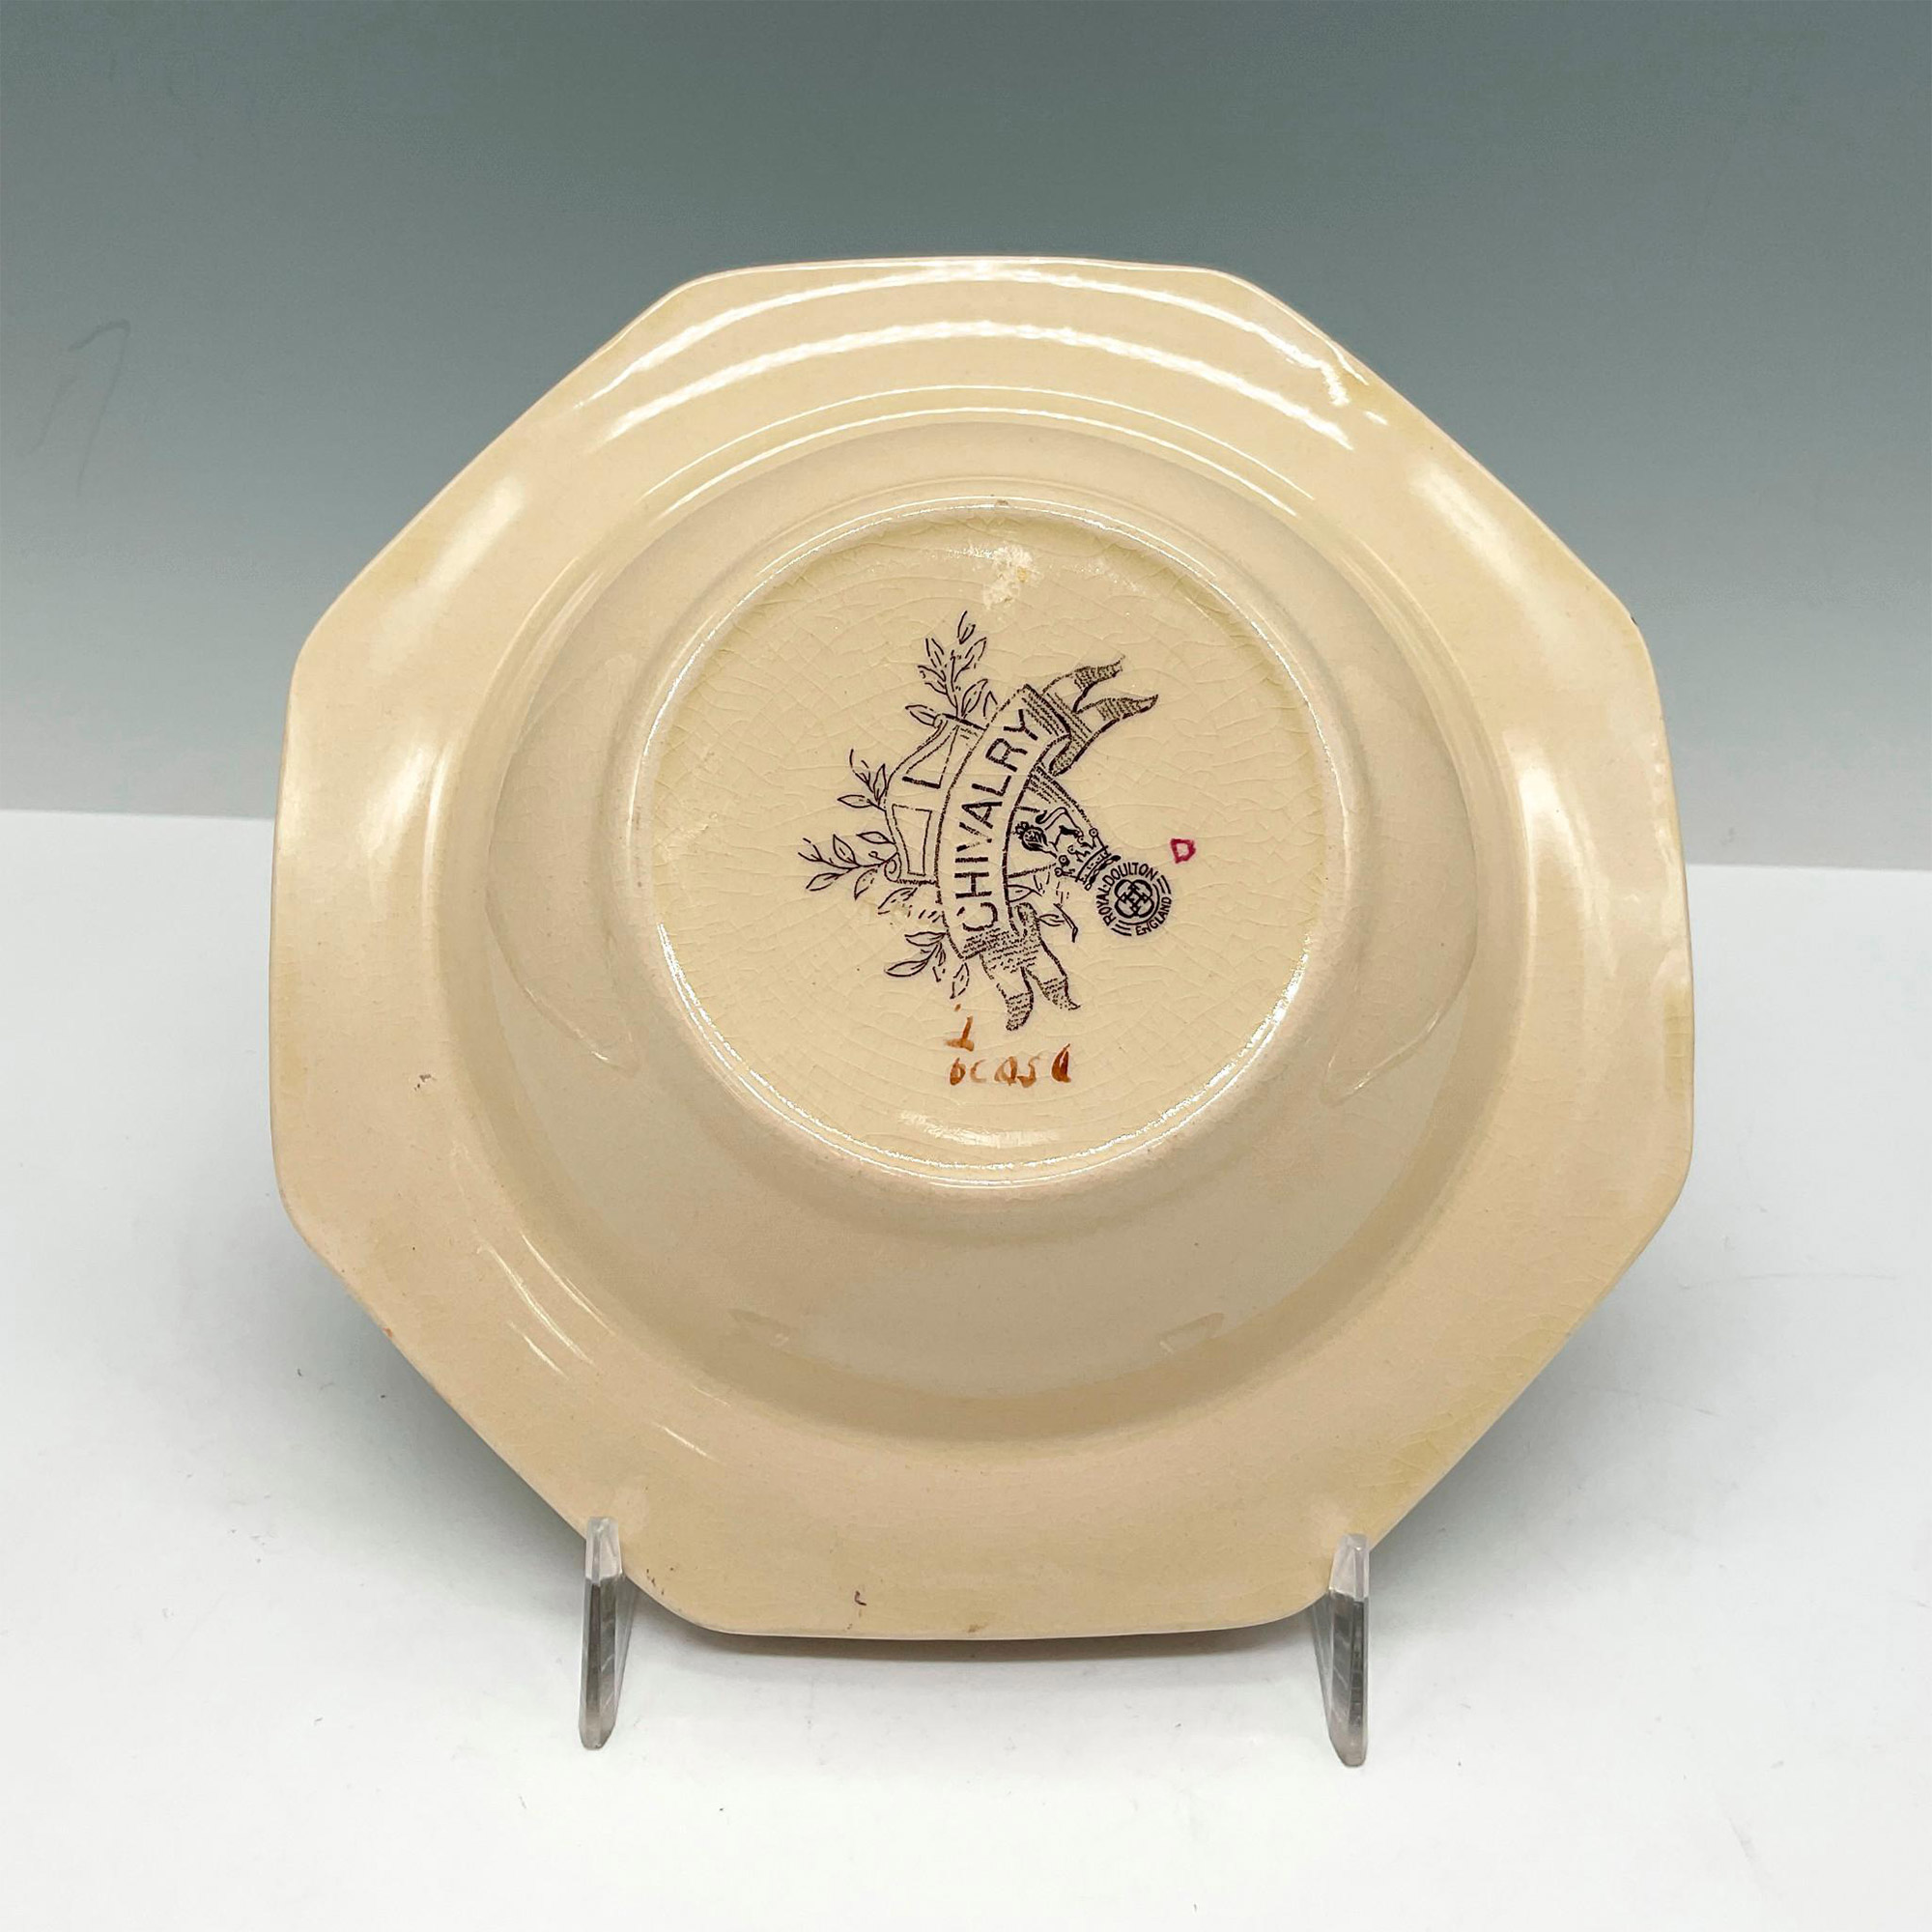 Royal Doulton Stoneware Series Ware Plate, Chivalry - Image 2 of 2